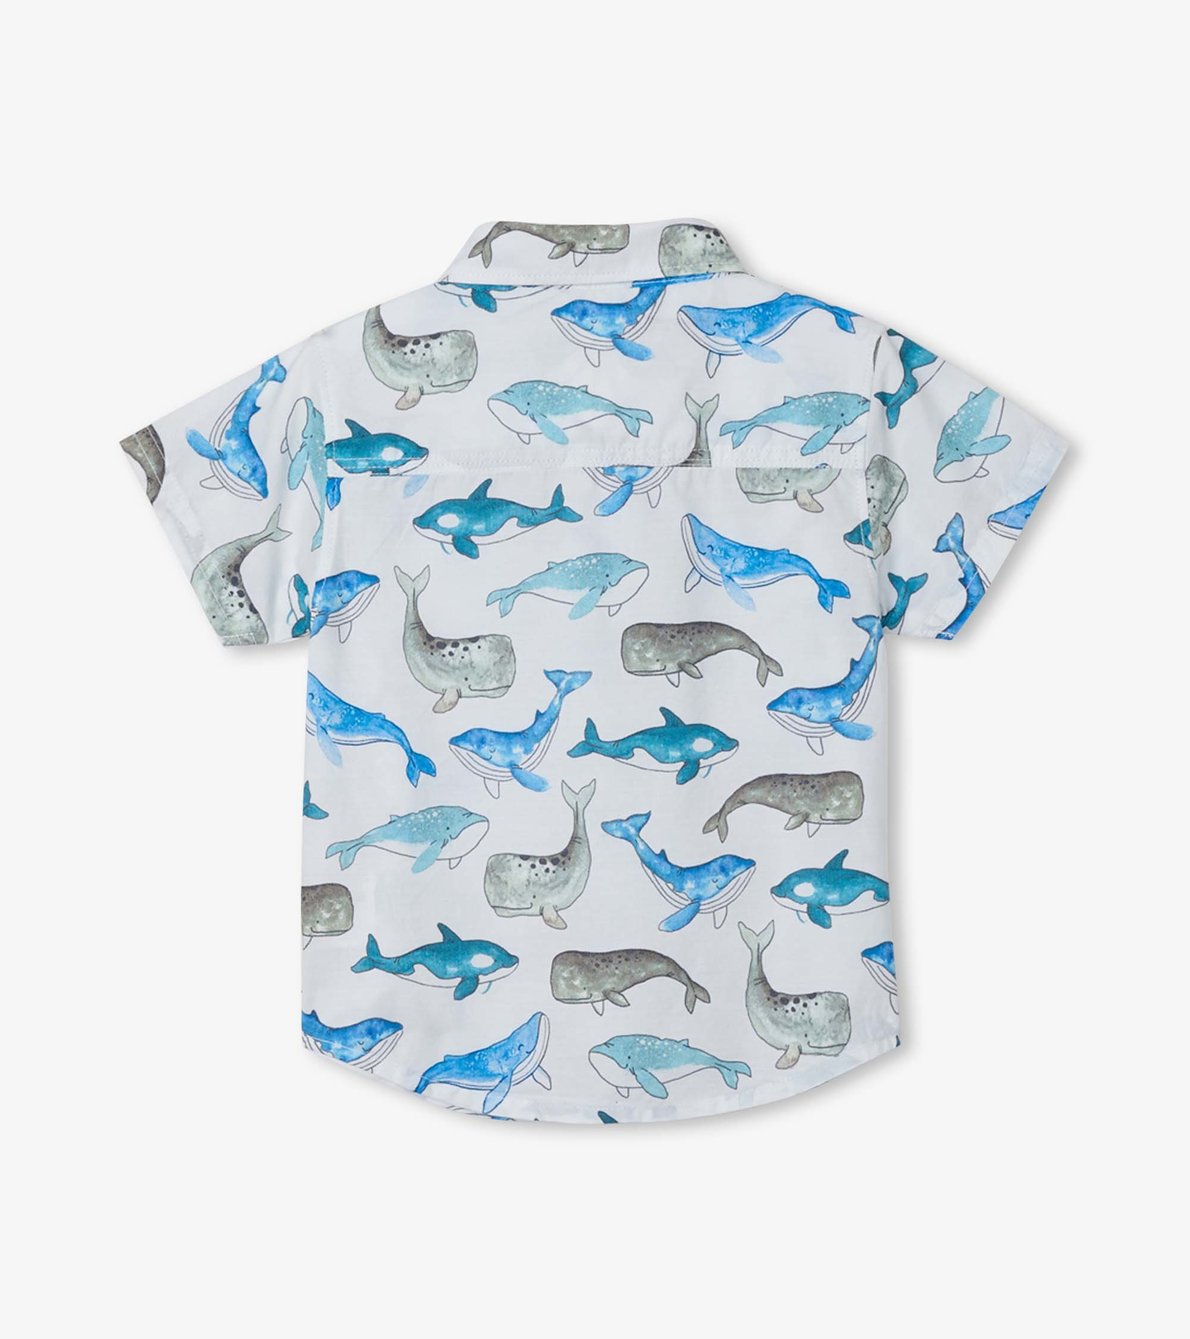 View larger image of Whales Baby Button Down Shirt